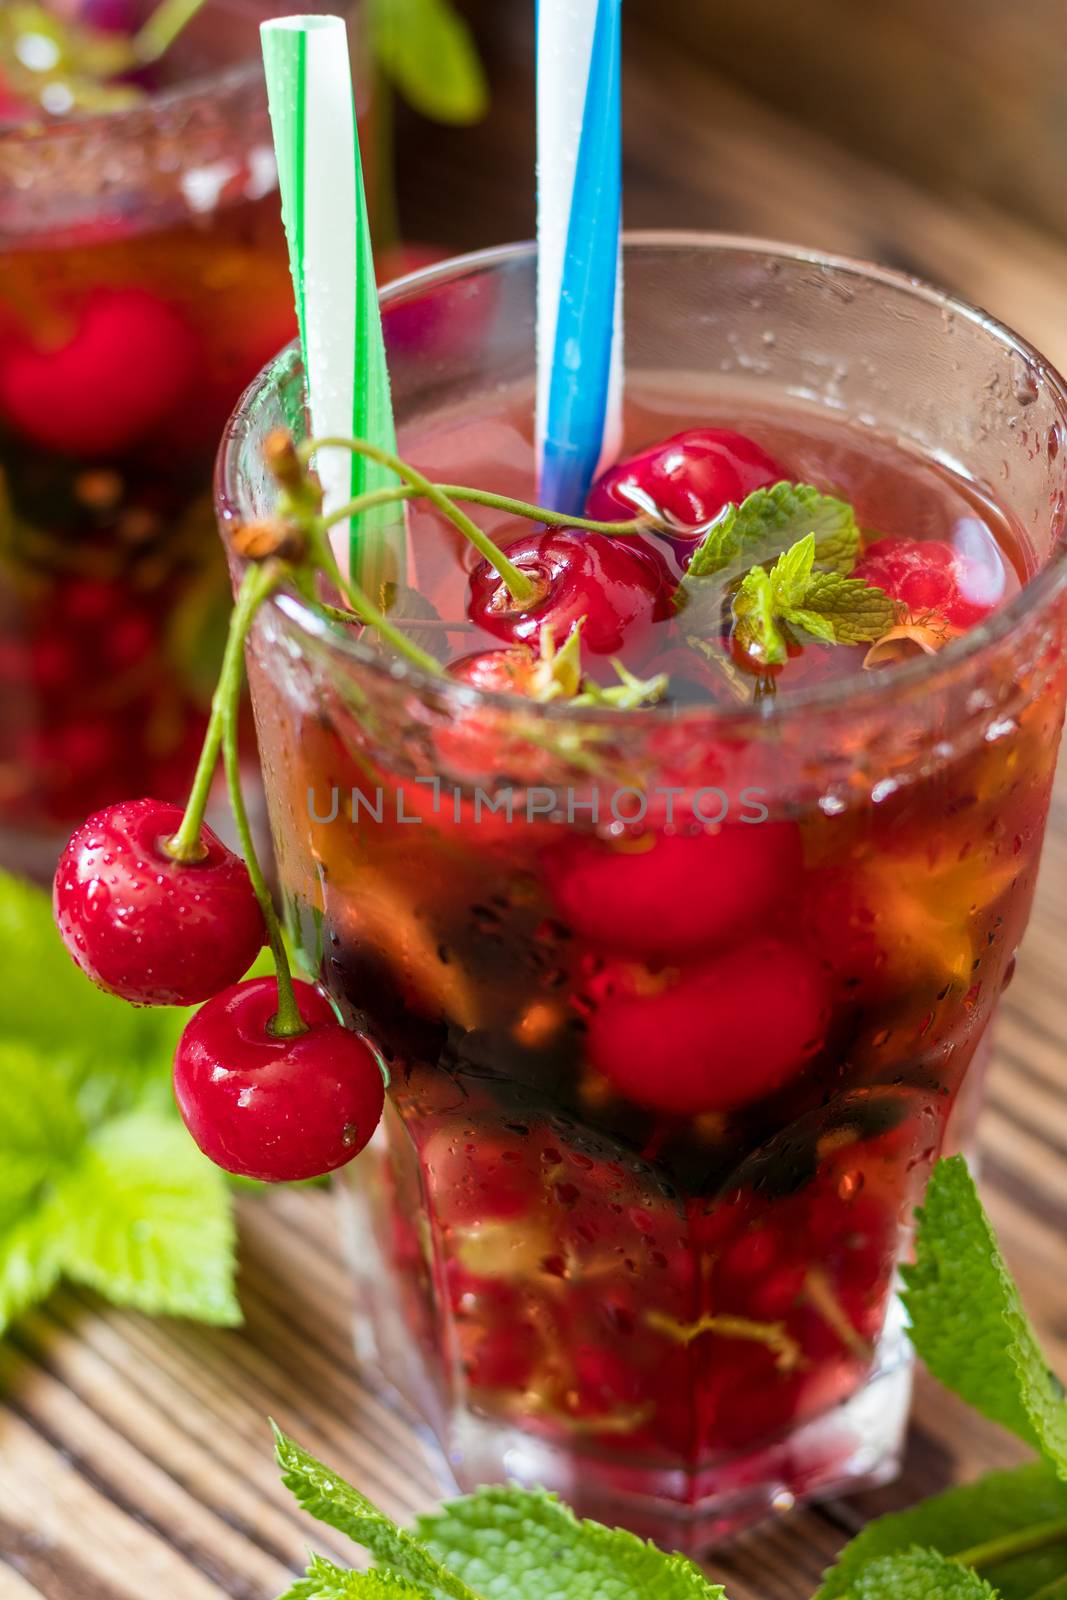 Refreshing  drinks flavored with fresh fruit by ArtSvitlyna